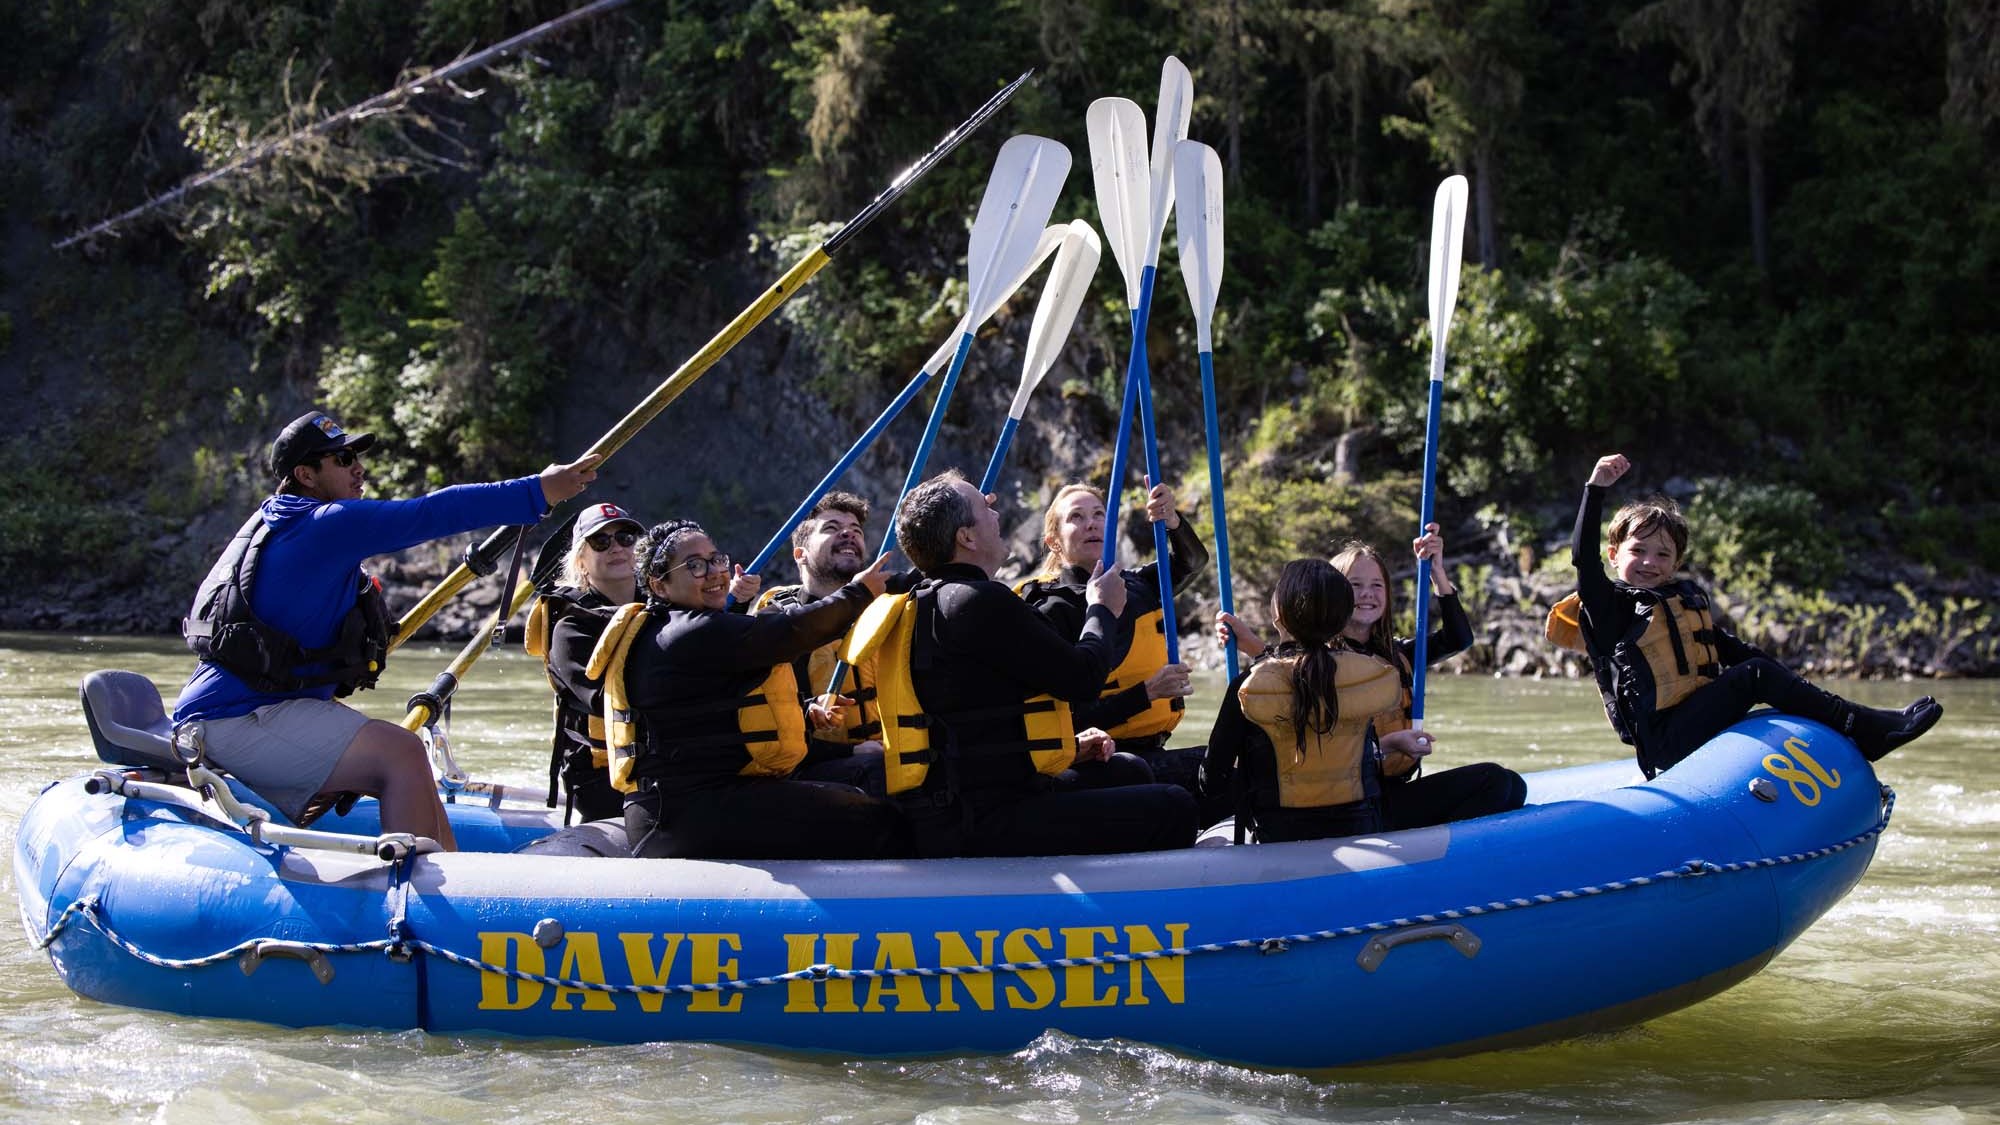 A group of whitewater rafters raise their paddles in a 